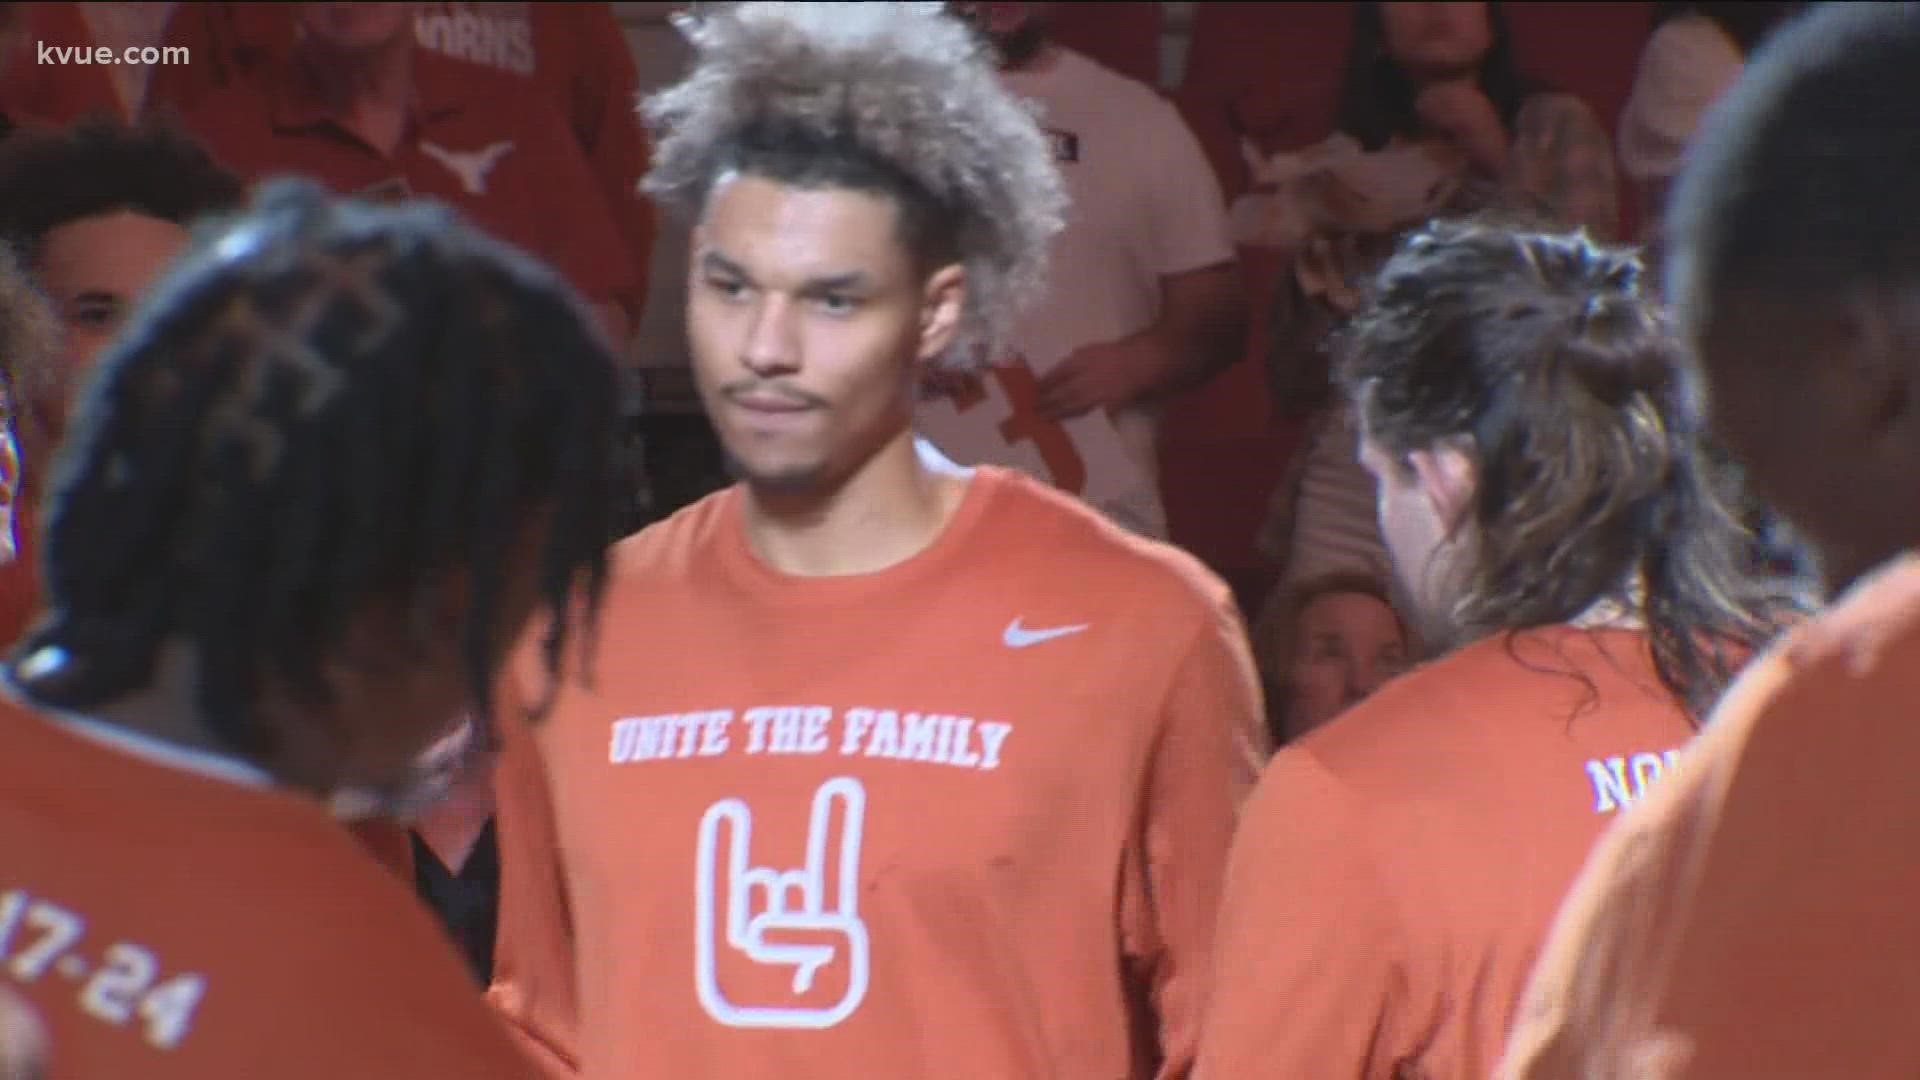 The former Texas men's basketball player is moving closer to home.